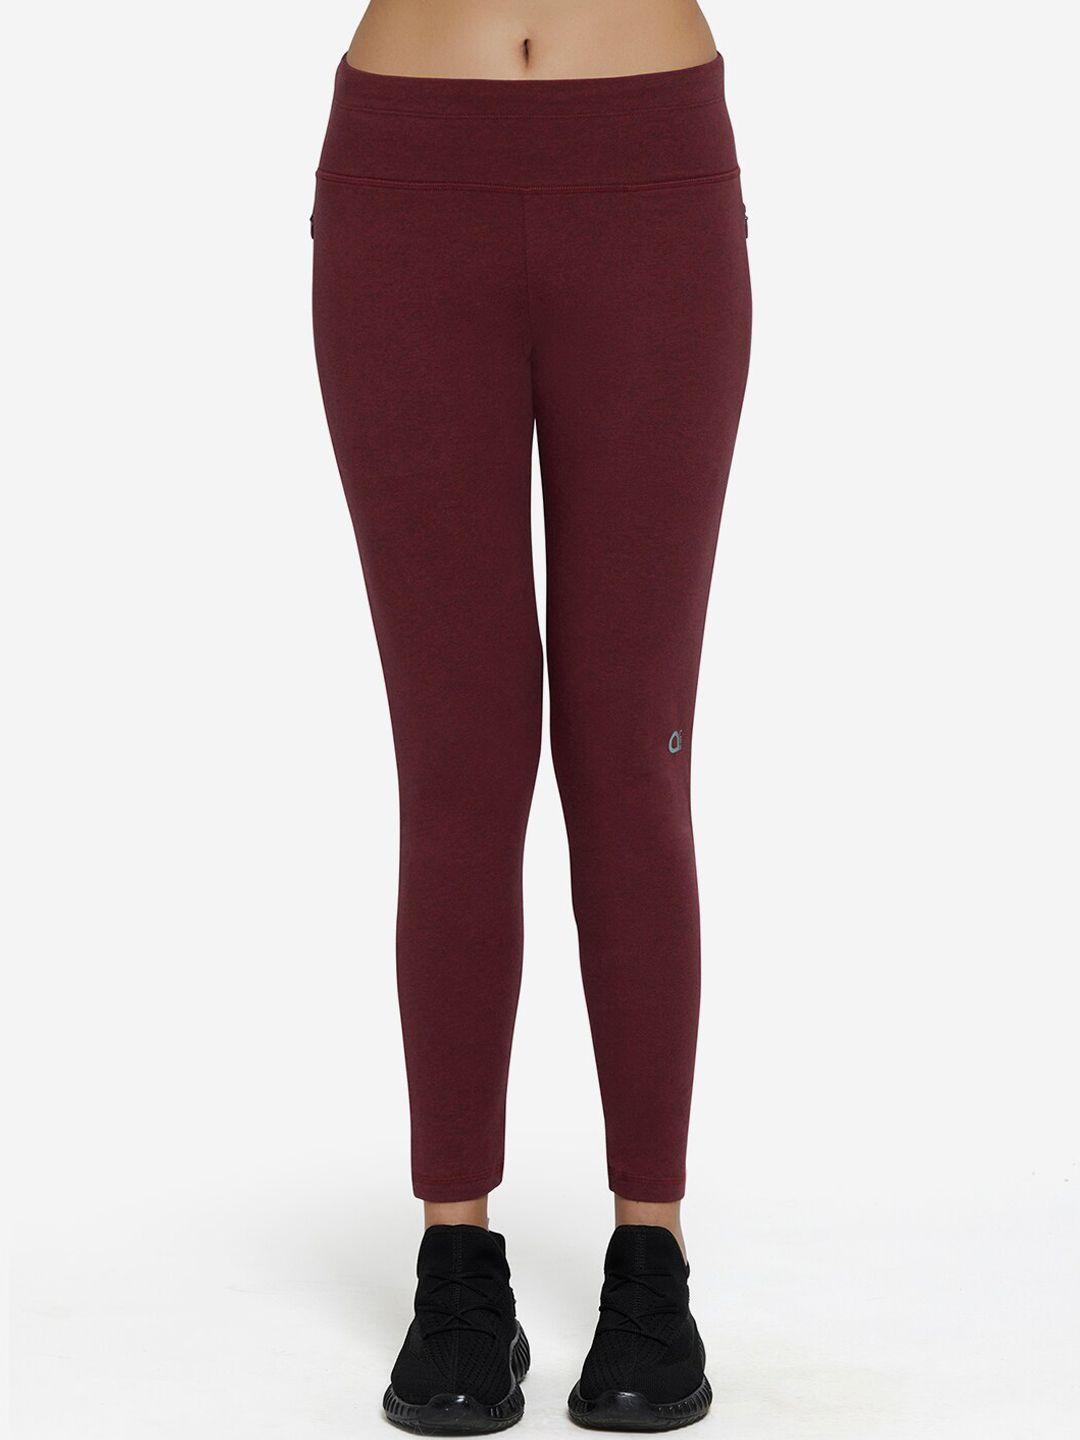 amante women maroon solid mid-rise tights